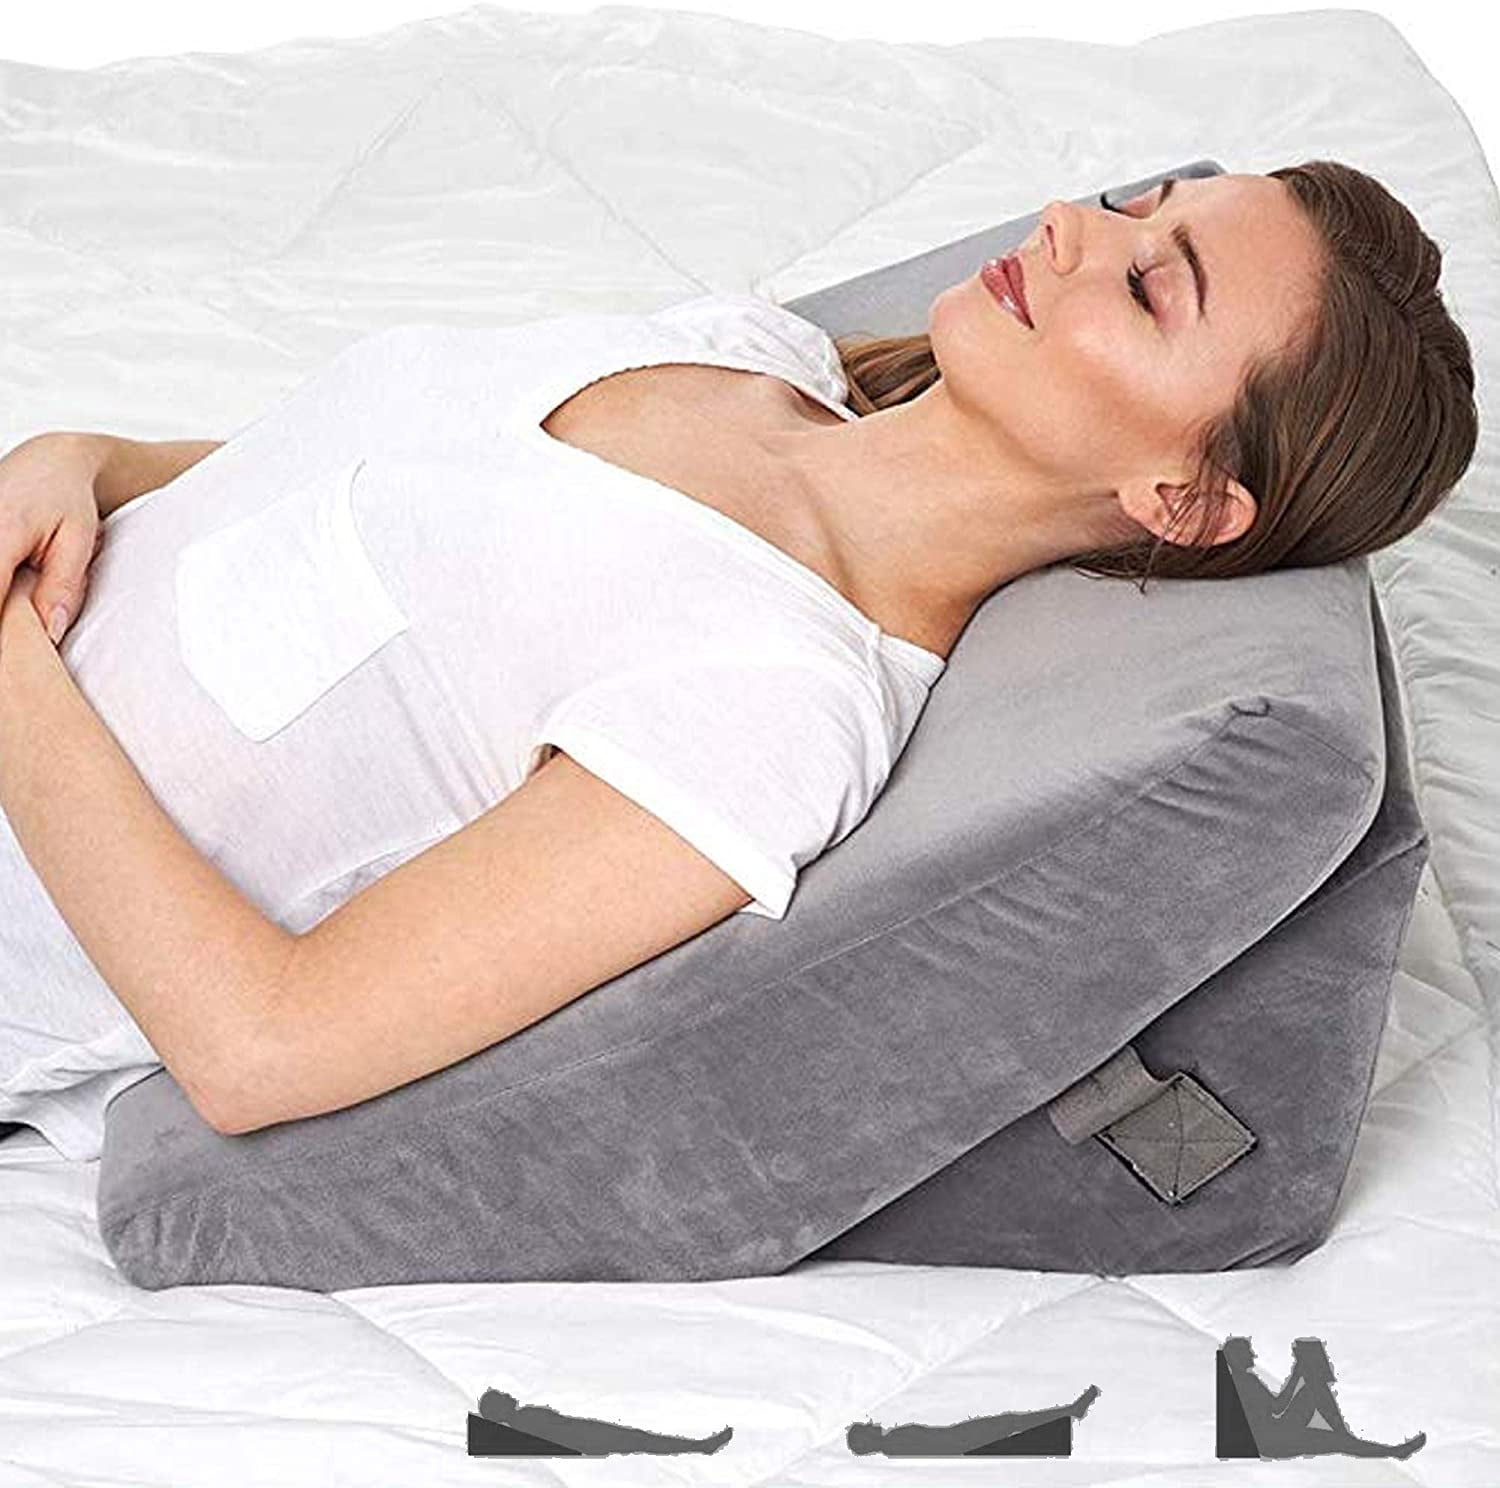 TruContour Lumbar Pillow for Sleeping, Lumbar Support Pillow for Bed, for  Lower Back Pain While Sleeping, Adjustable Height, Includes Storage Case